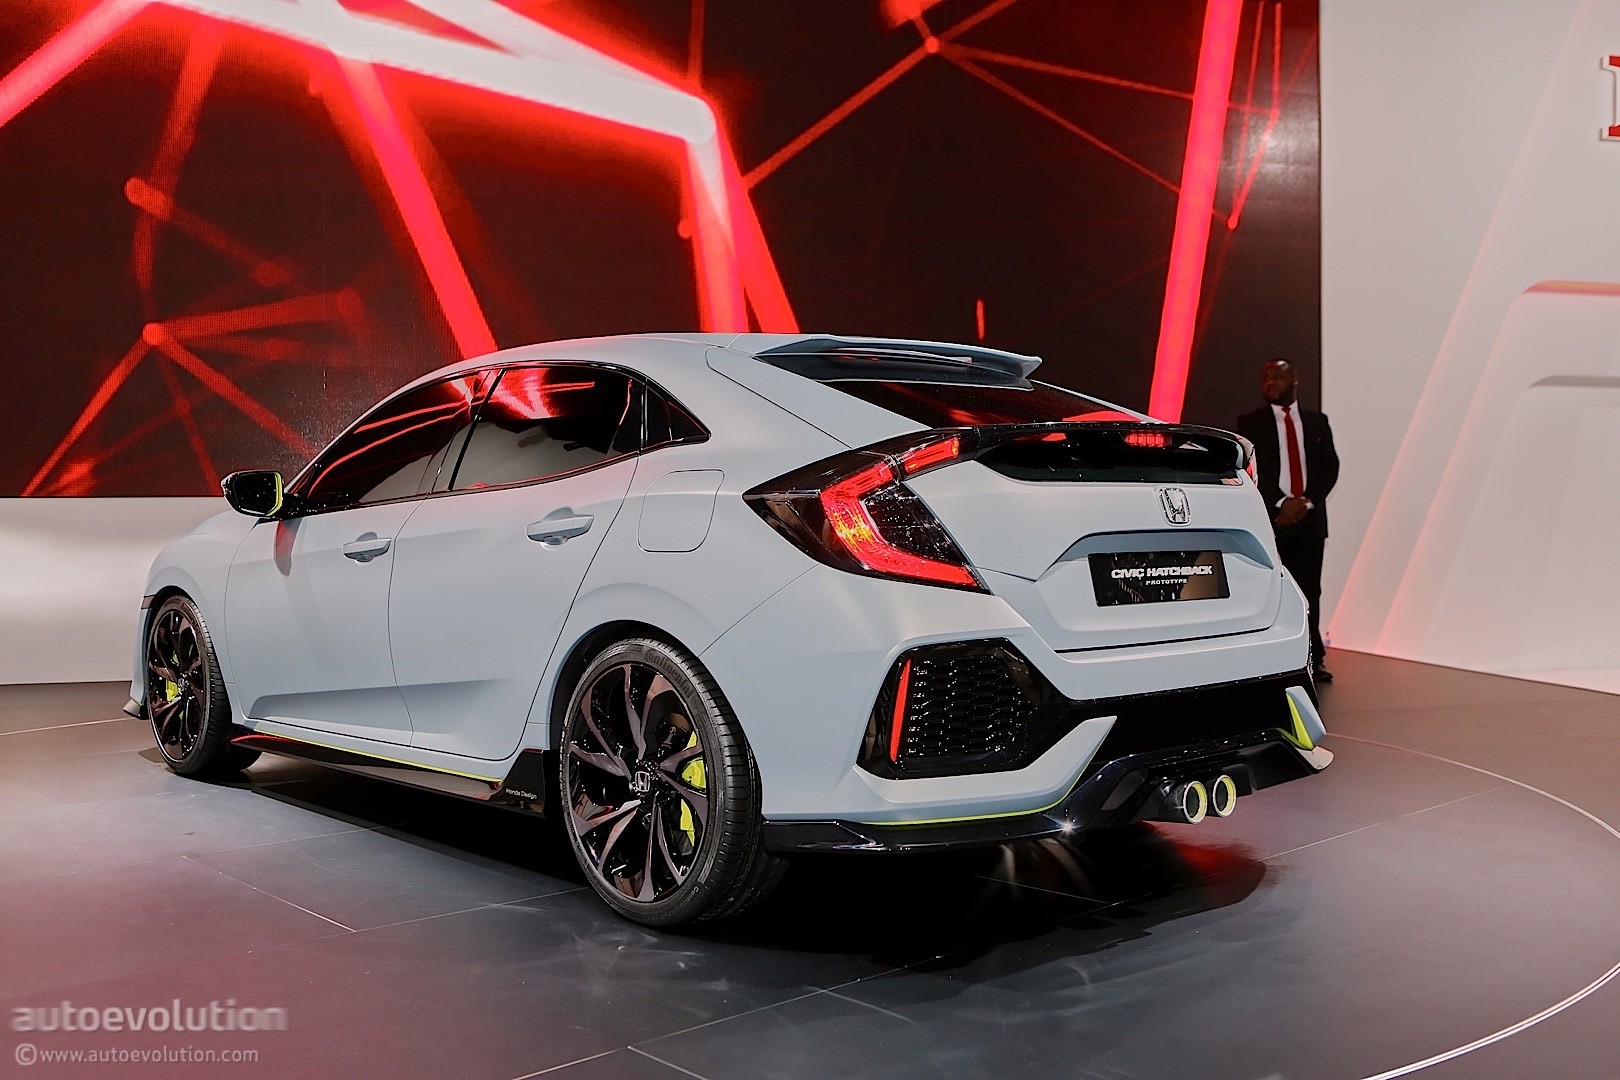 ... Coming to New York, Civic Si and New Type R in 2017 - autoevolution